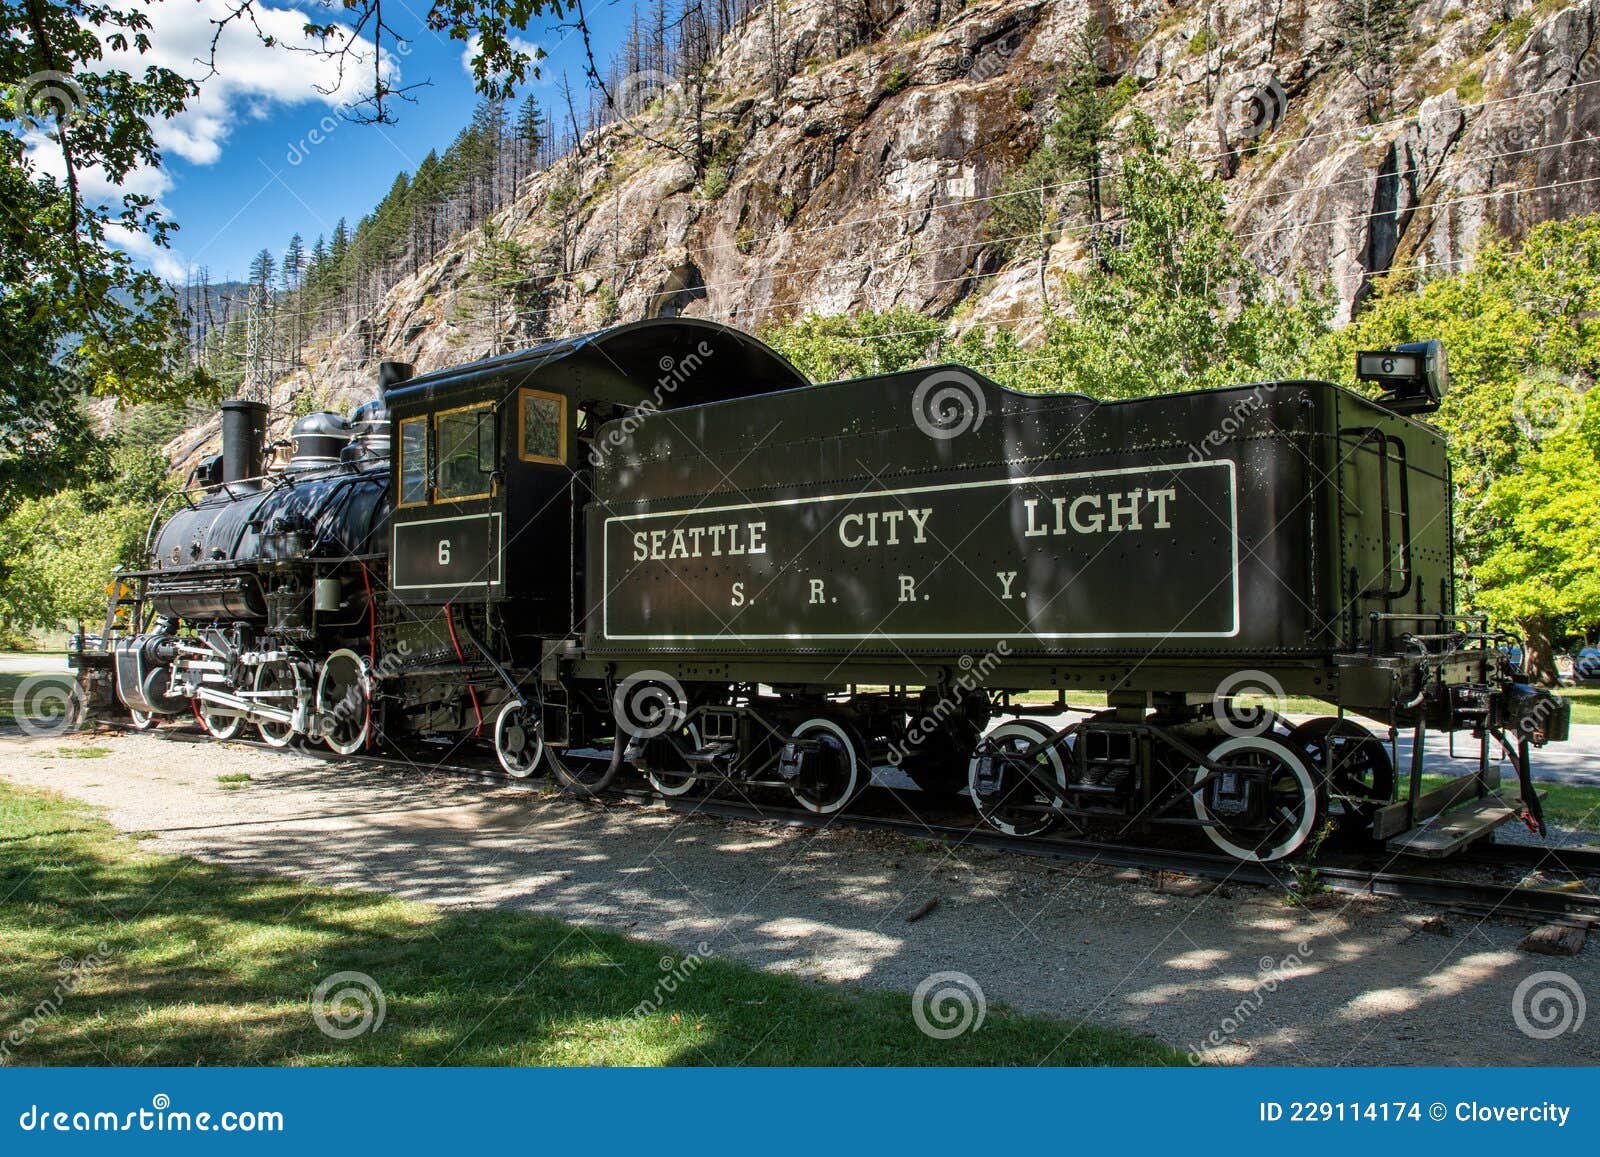 old-number-6-seattle-city-light-steam-engine-at-the-visitors-center